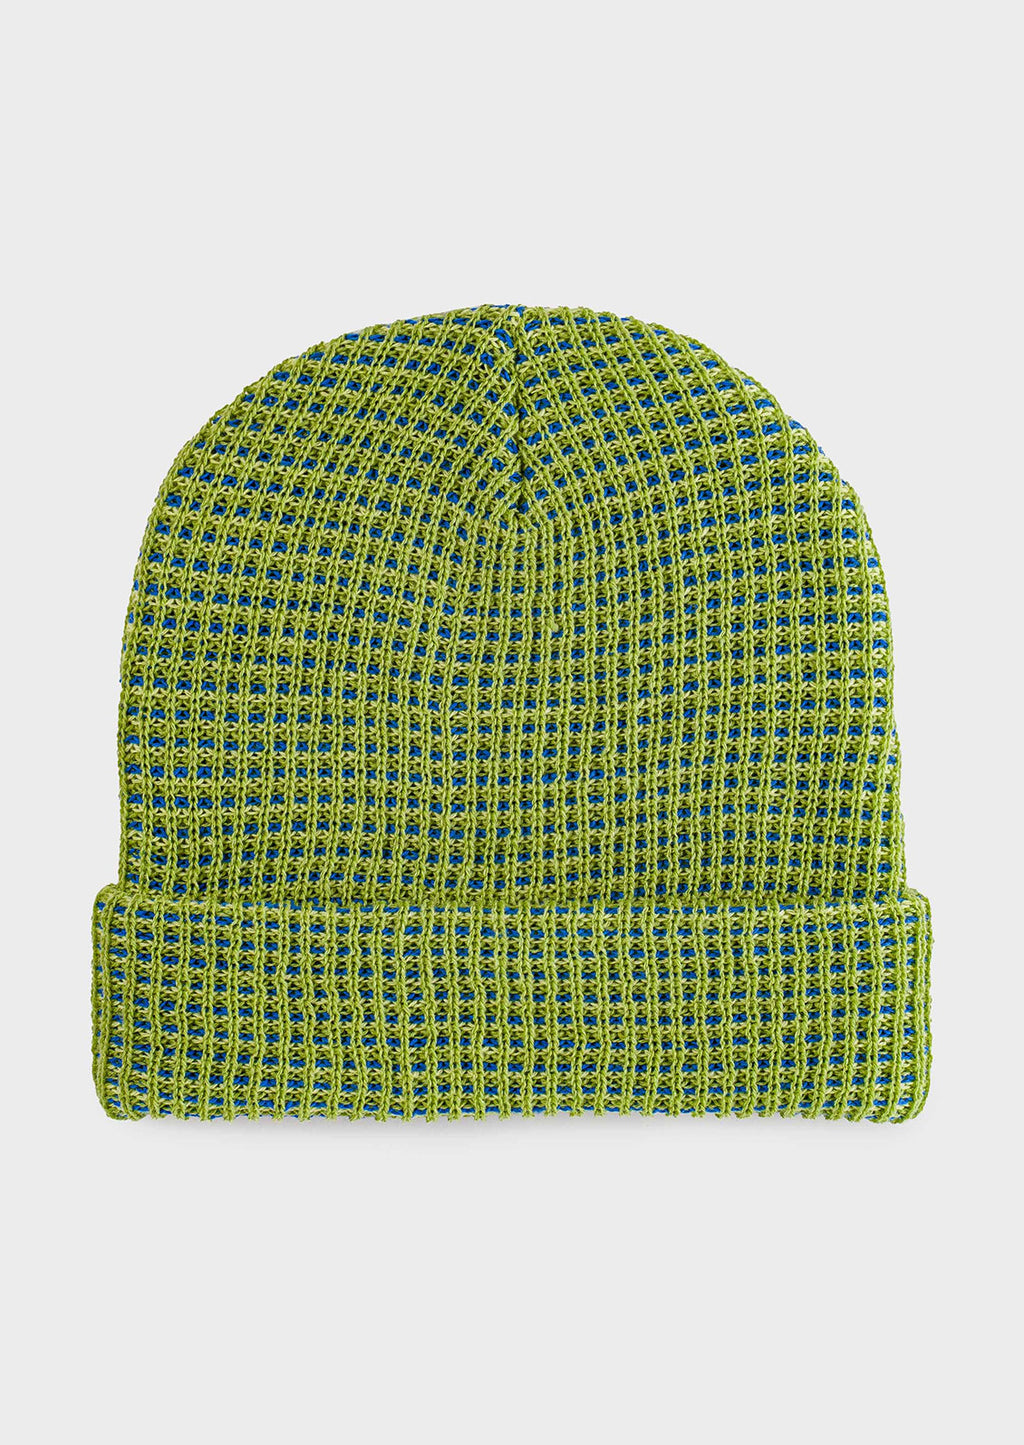 Chartreuse / Cobalt: A rib knit beanie in chartreuse and cobalt.